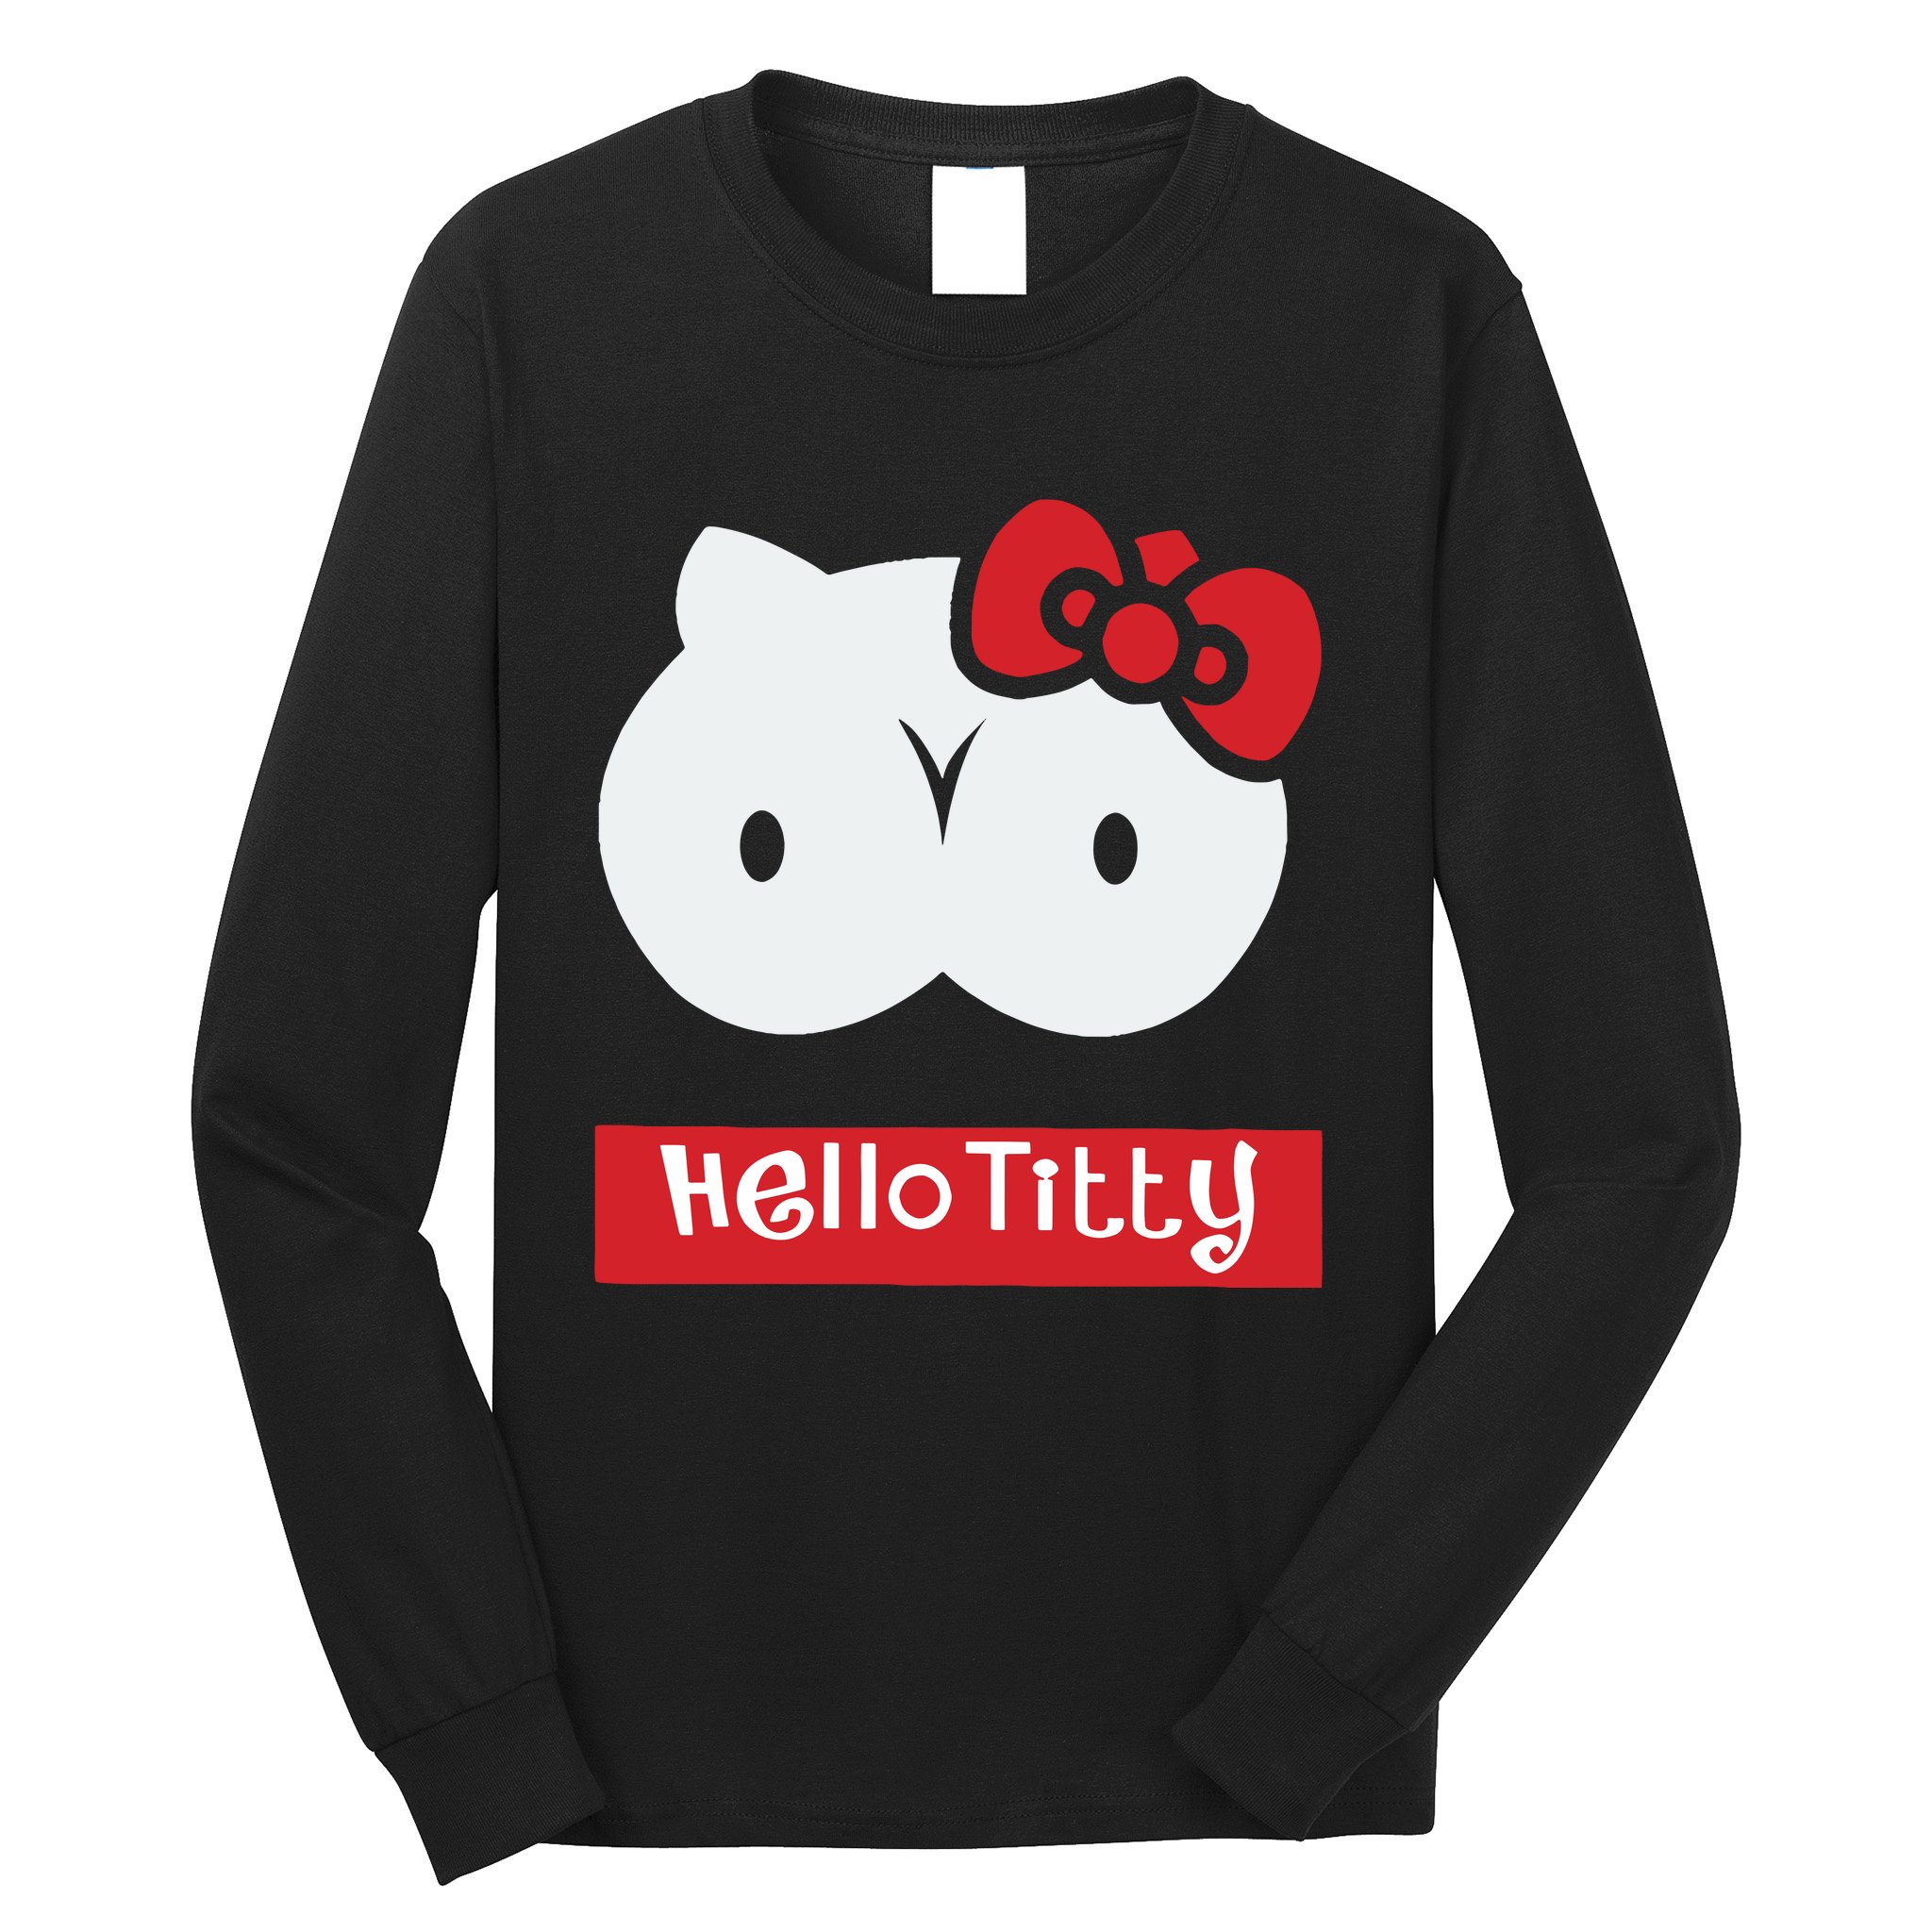 T-shirt Hello Kitty Decal Sticker Breast, T-shirt, color, sticker